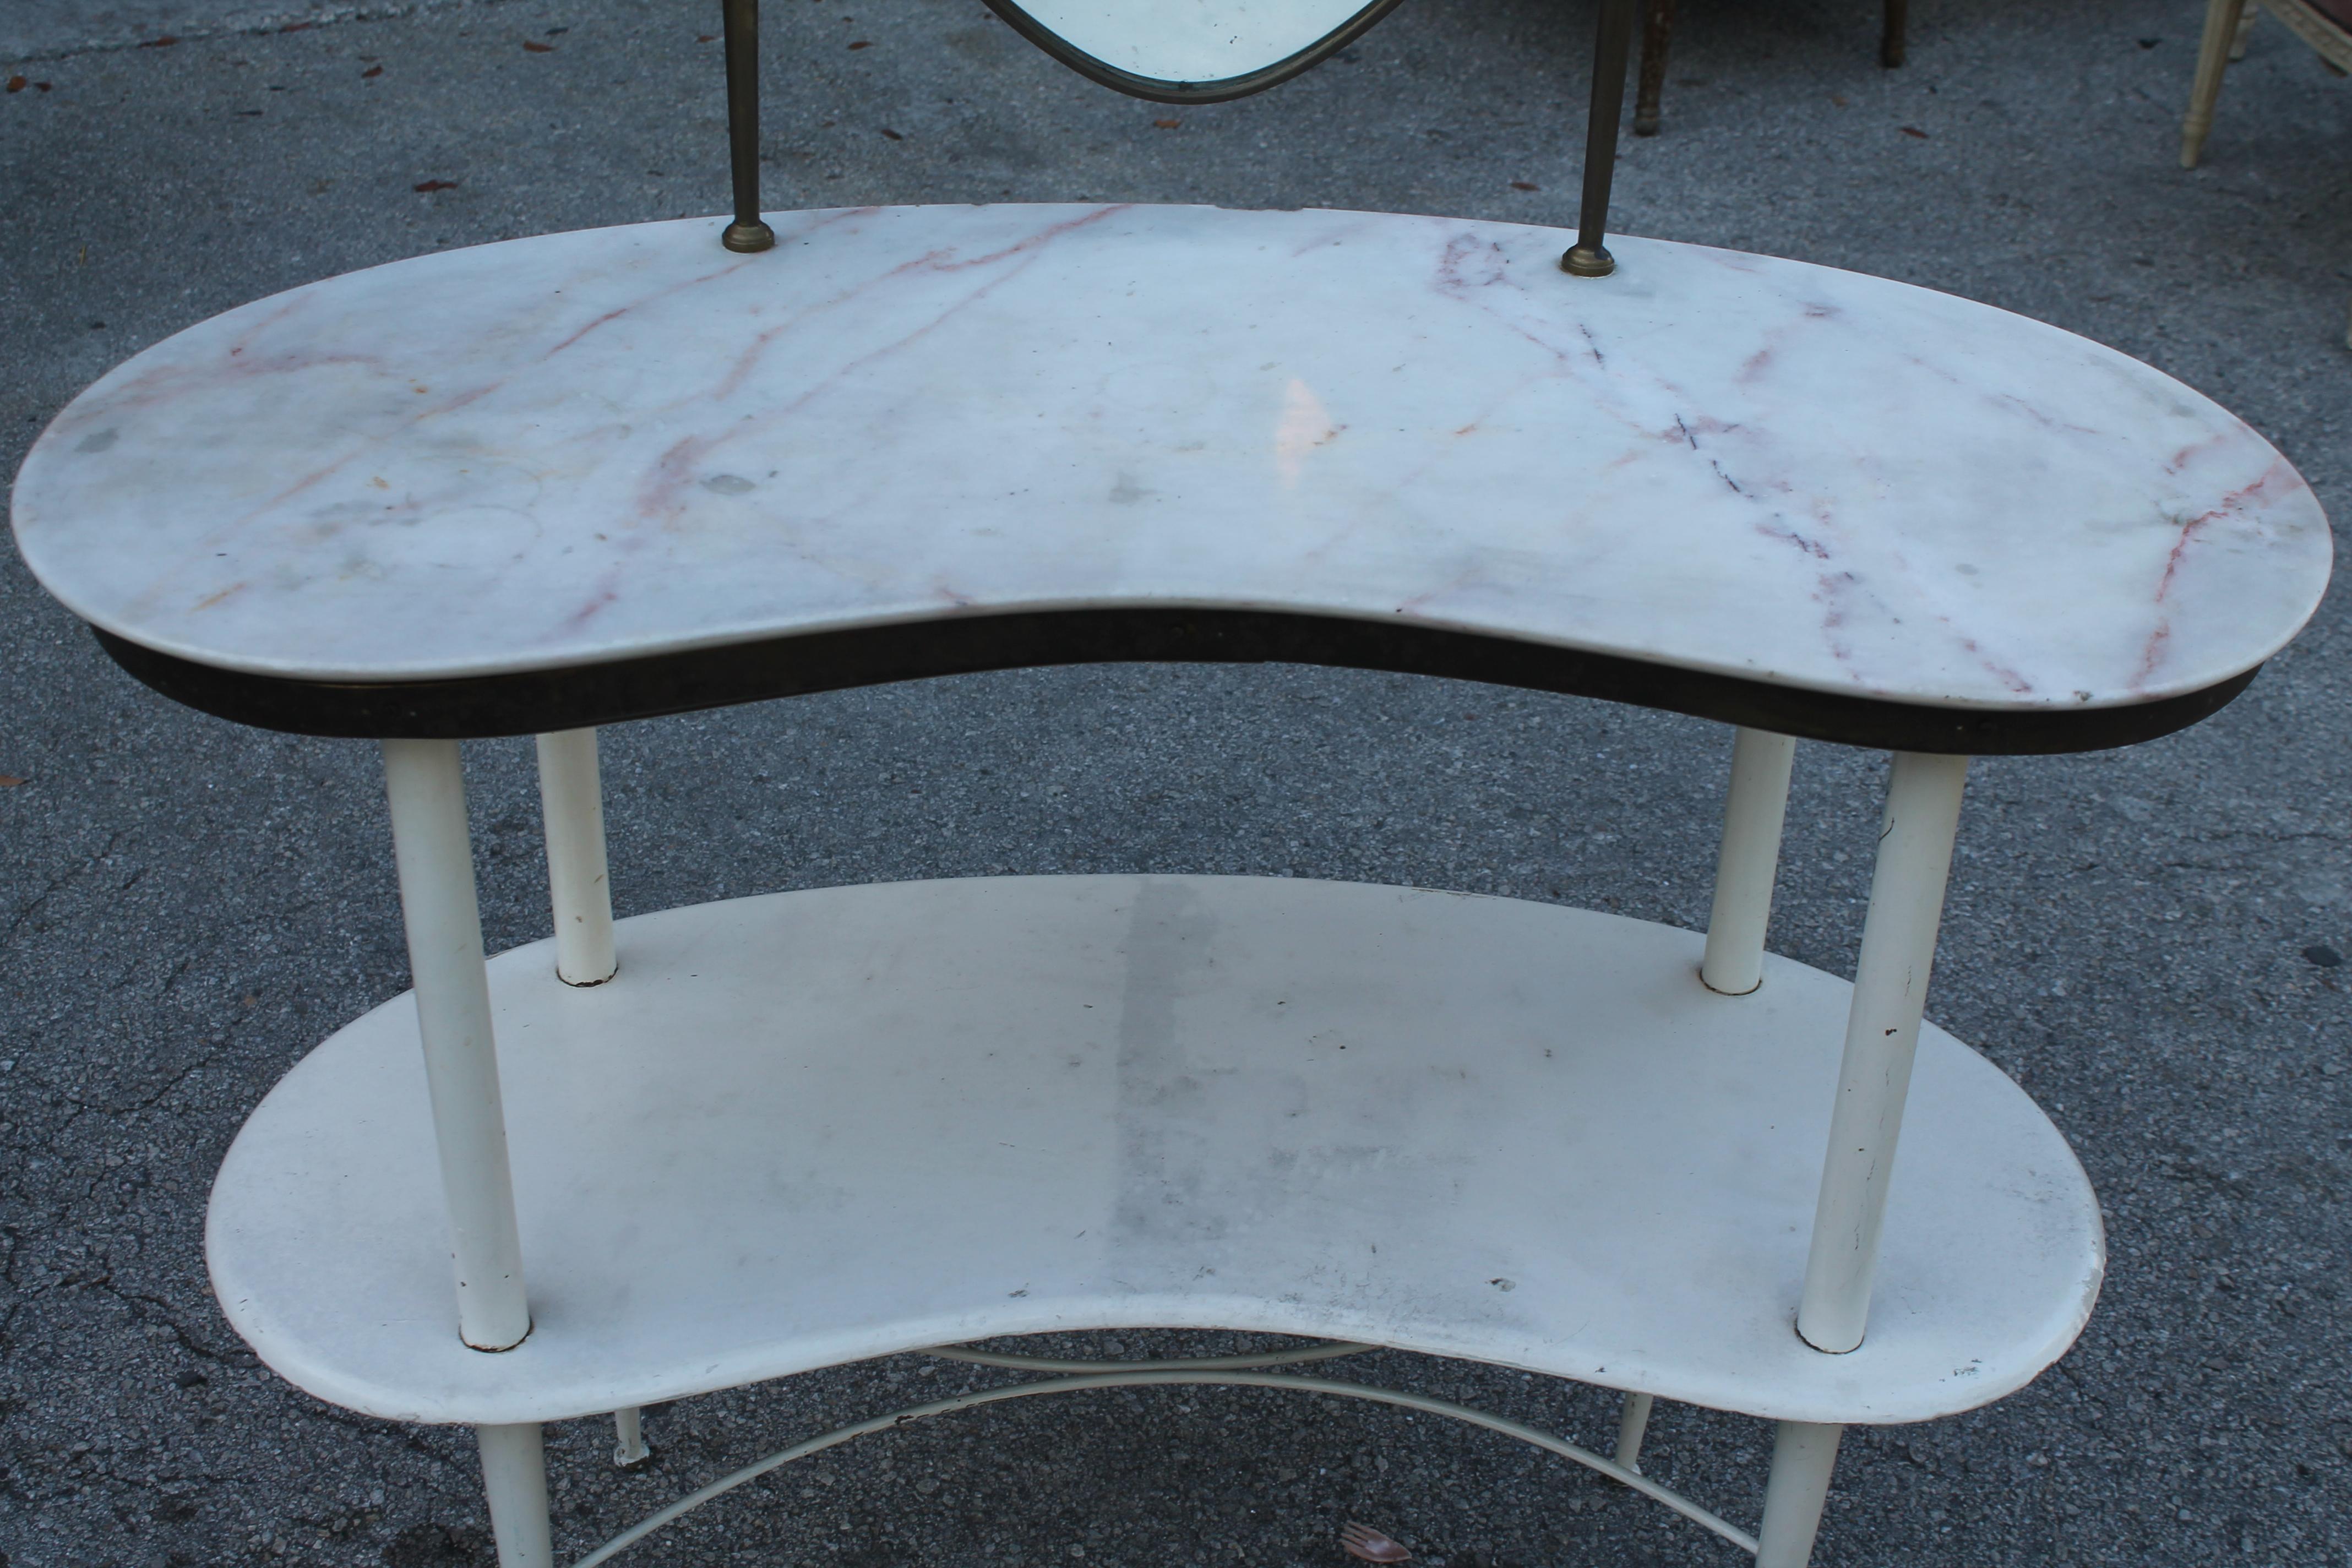 1950's French Mid Century Modern Ladies Mirrored Vanity with Marble Kidney Shape In Good Condition For Sale In Opa Locka, FL